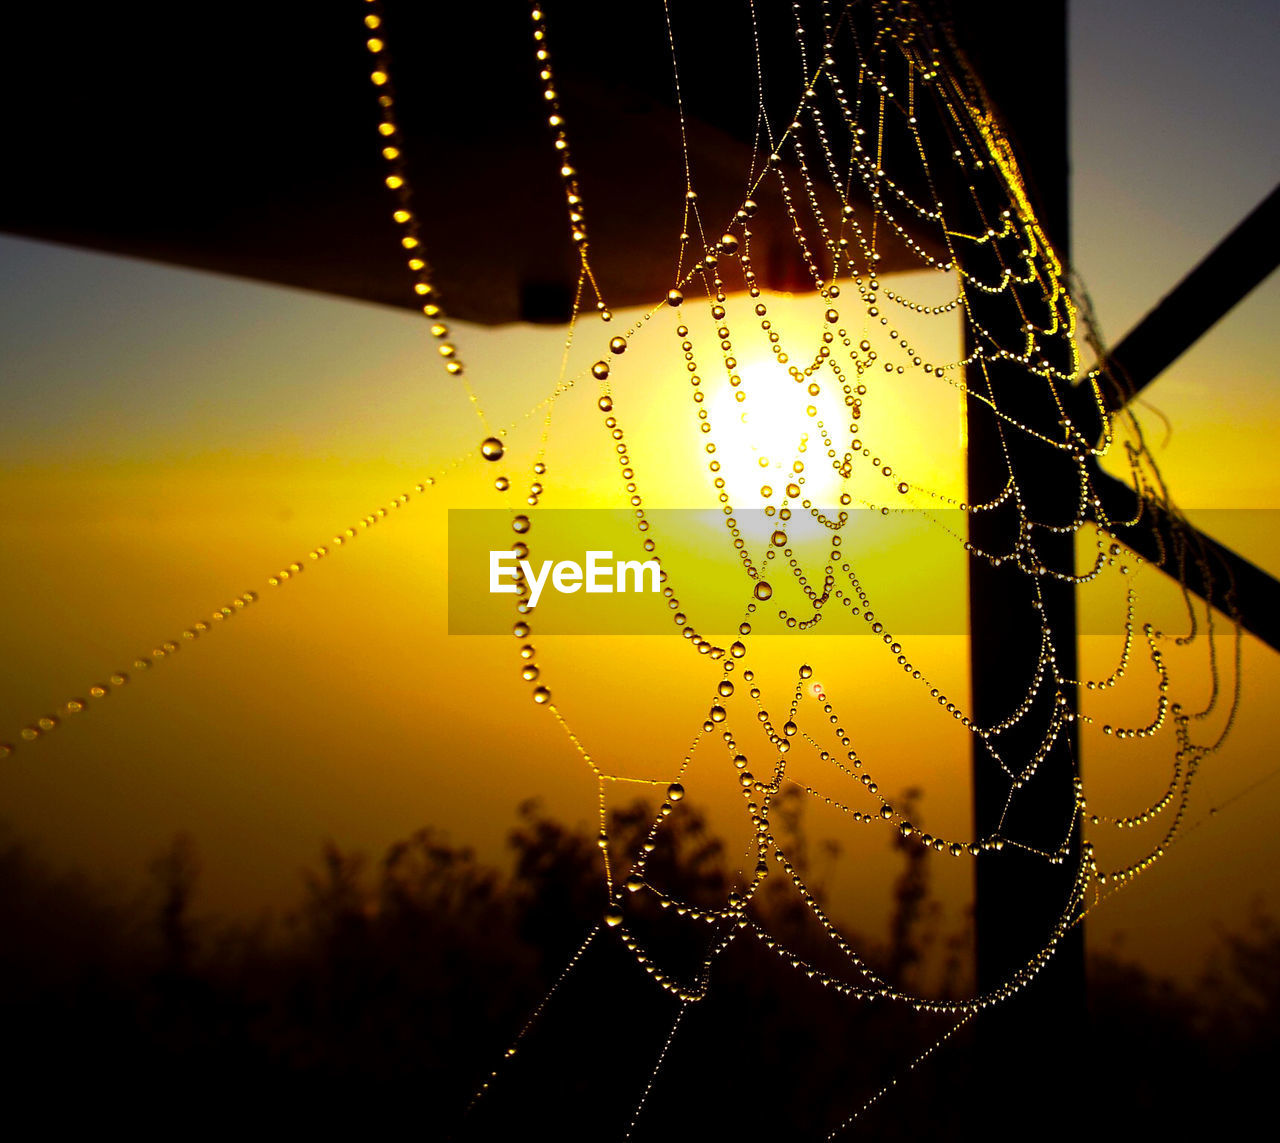 Close-up of water drops on spider web at sunset